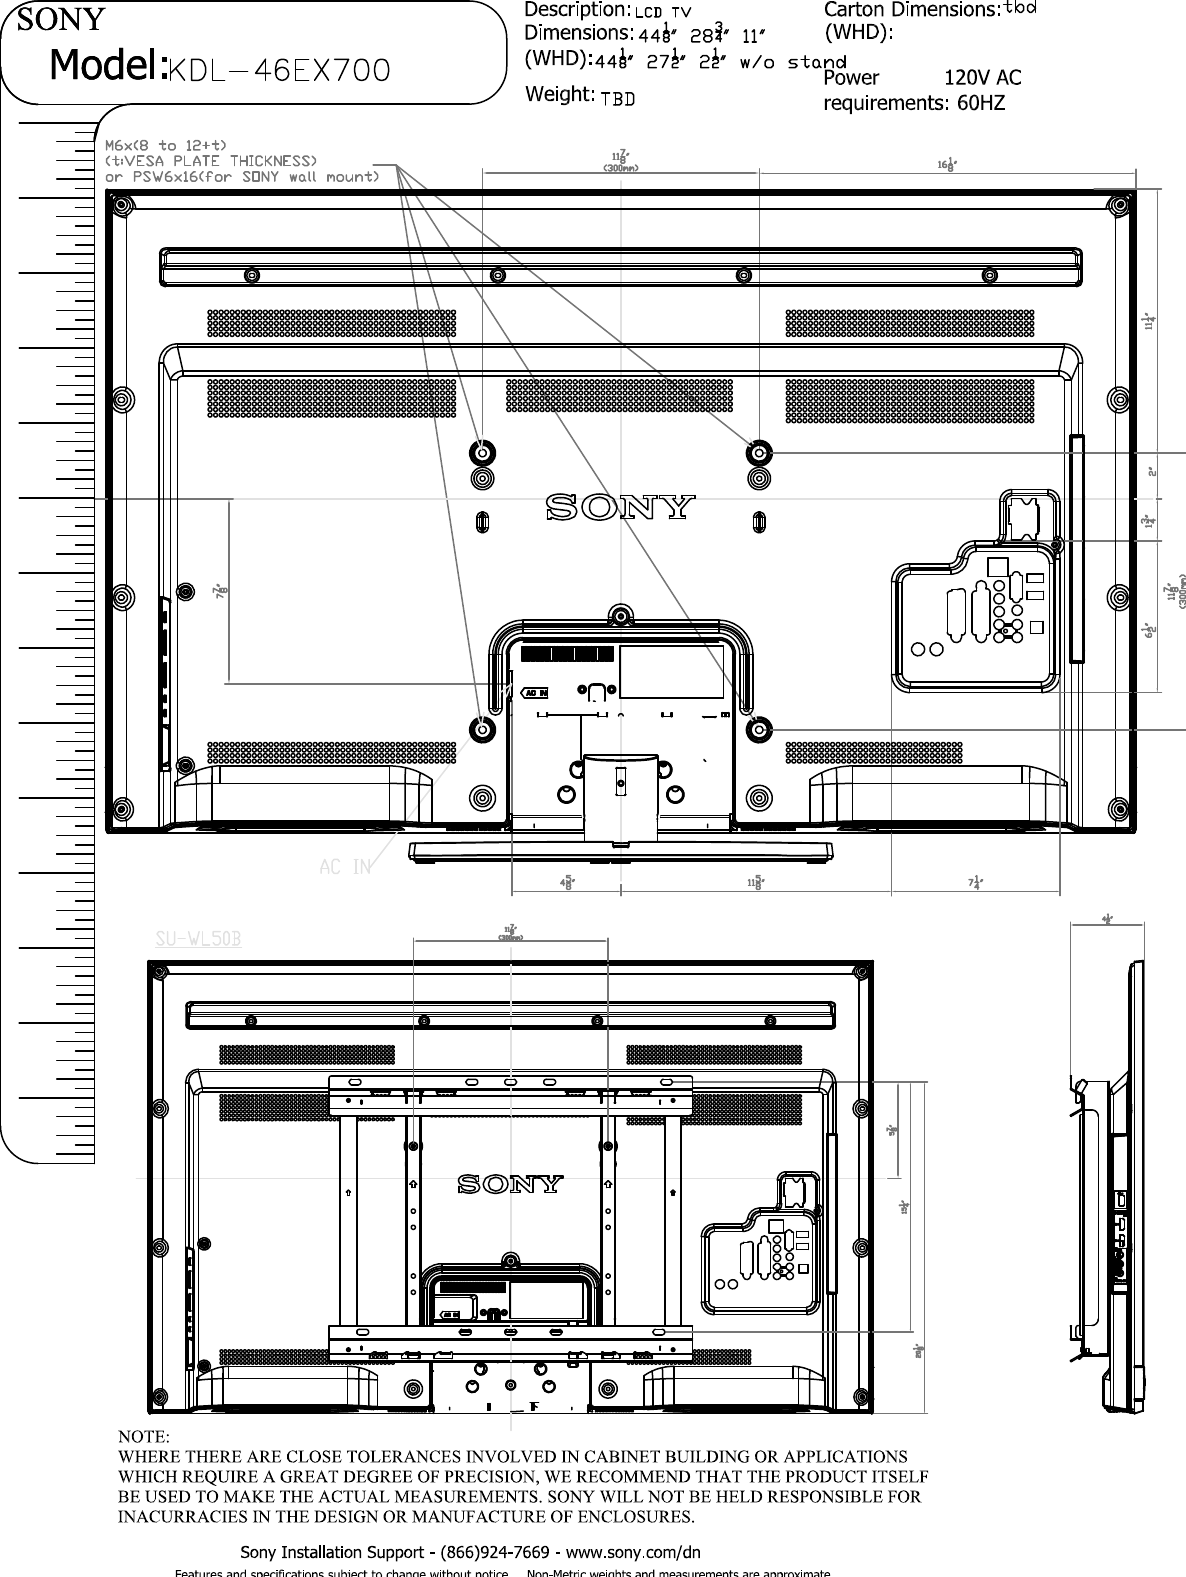 Page 2 of 3 - Sony KDL-46EX700 Layout1  User Manual Dimensions Diagram KDL46EX700 Cutsheet